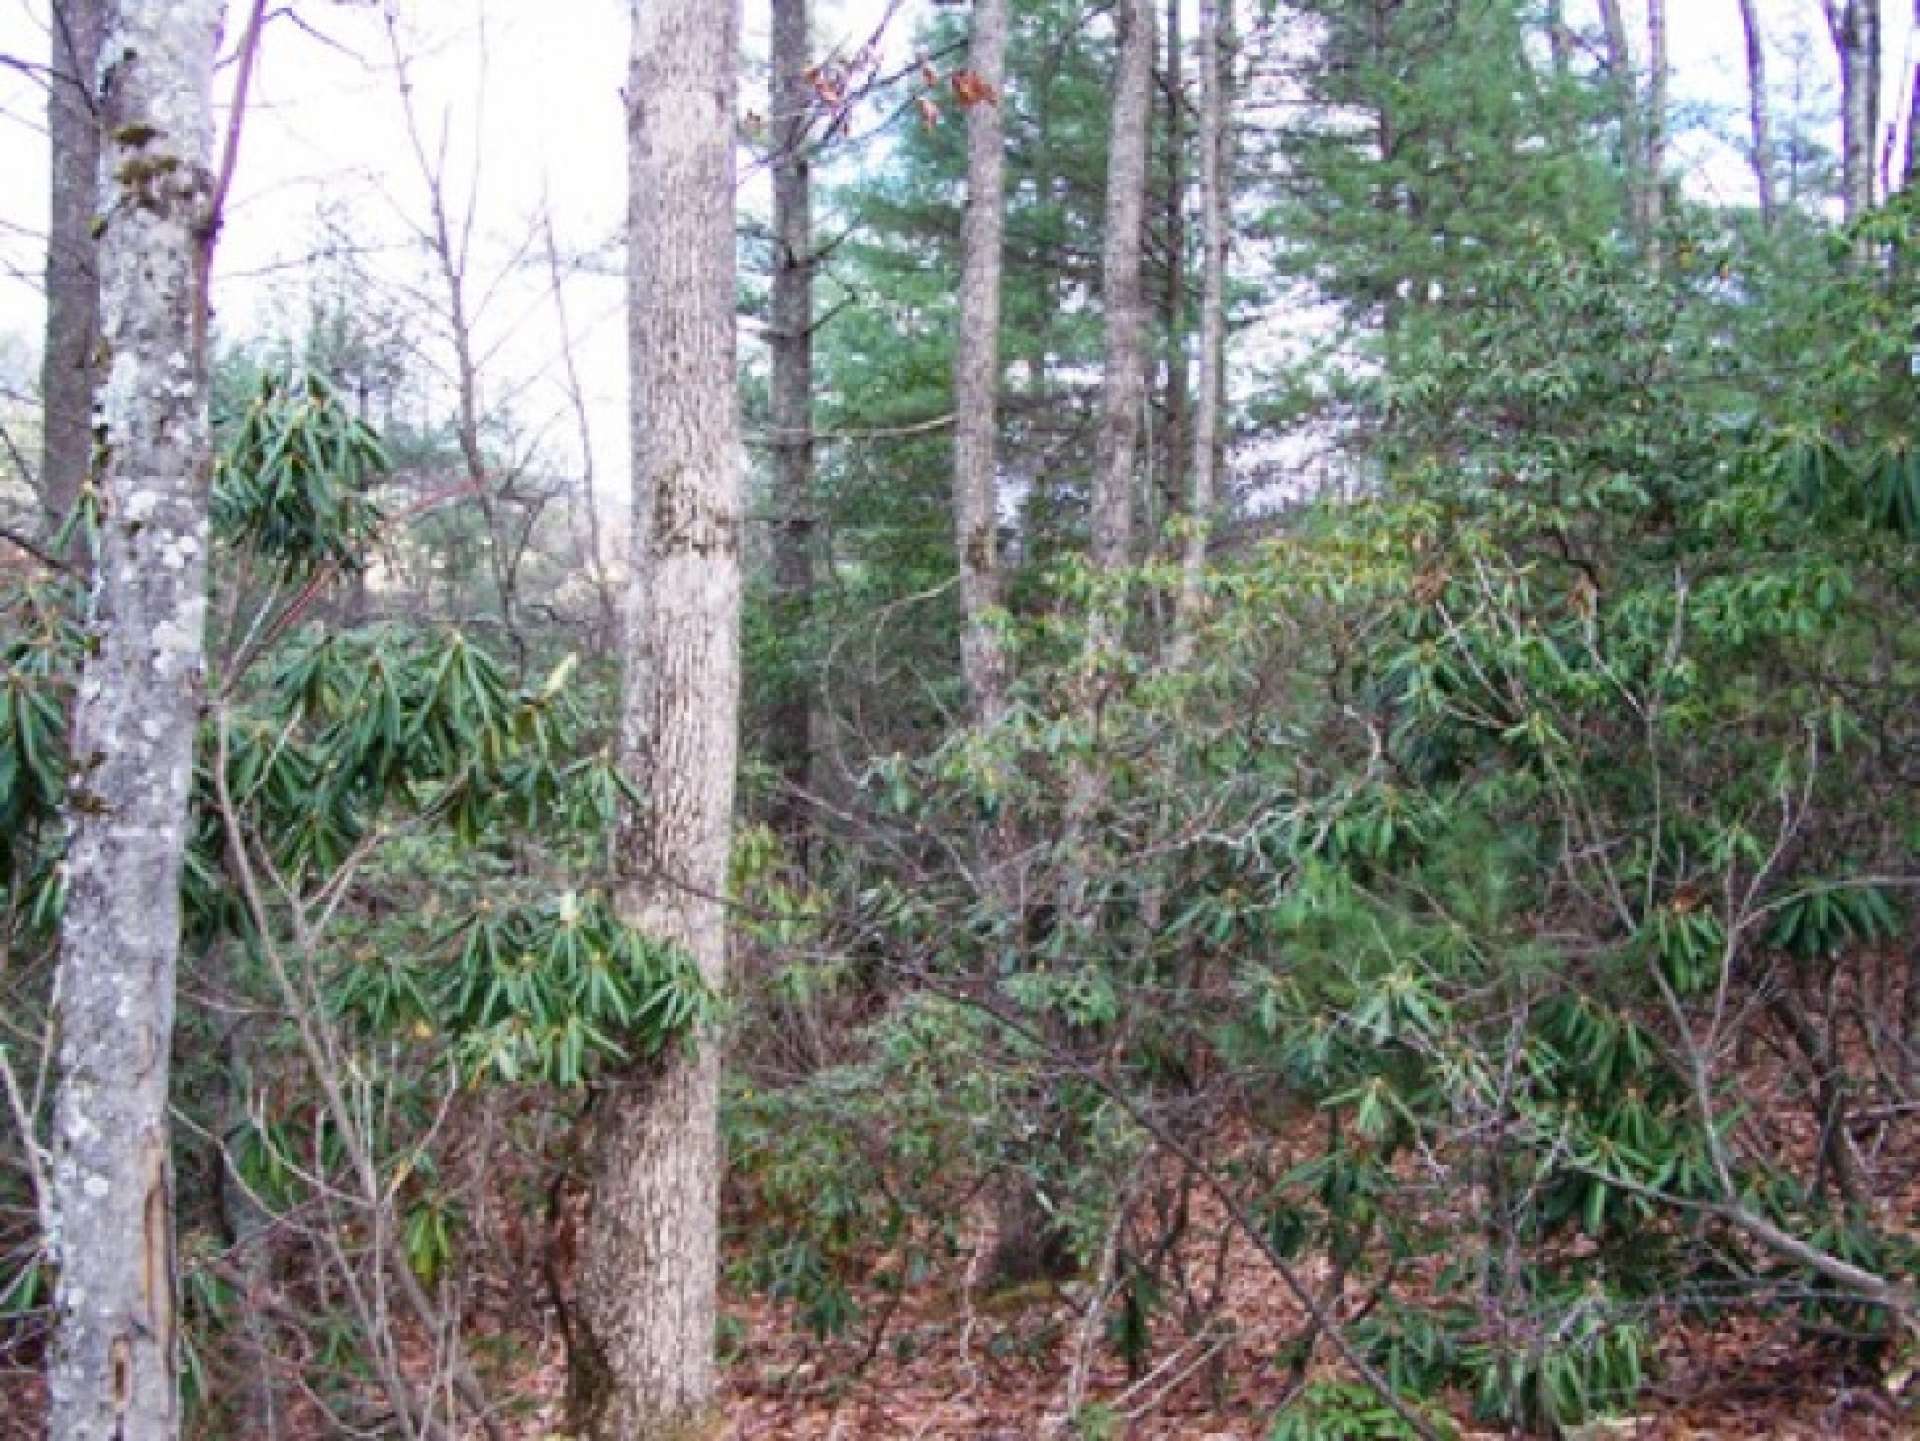 Lot 1 is a 1.409 sloping wooded lot with nice seasonal views and easy access